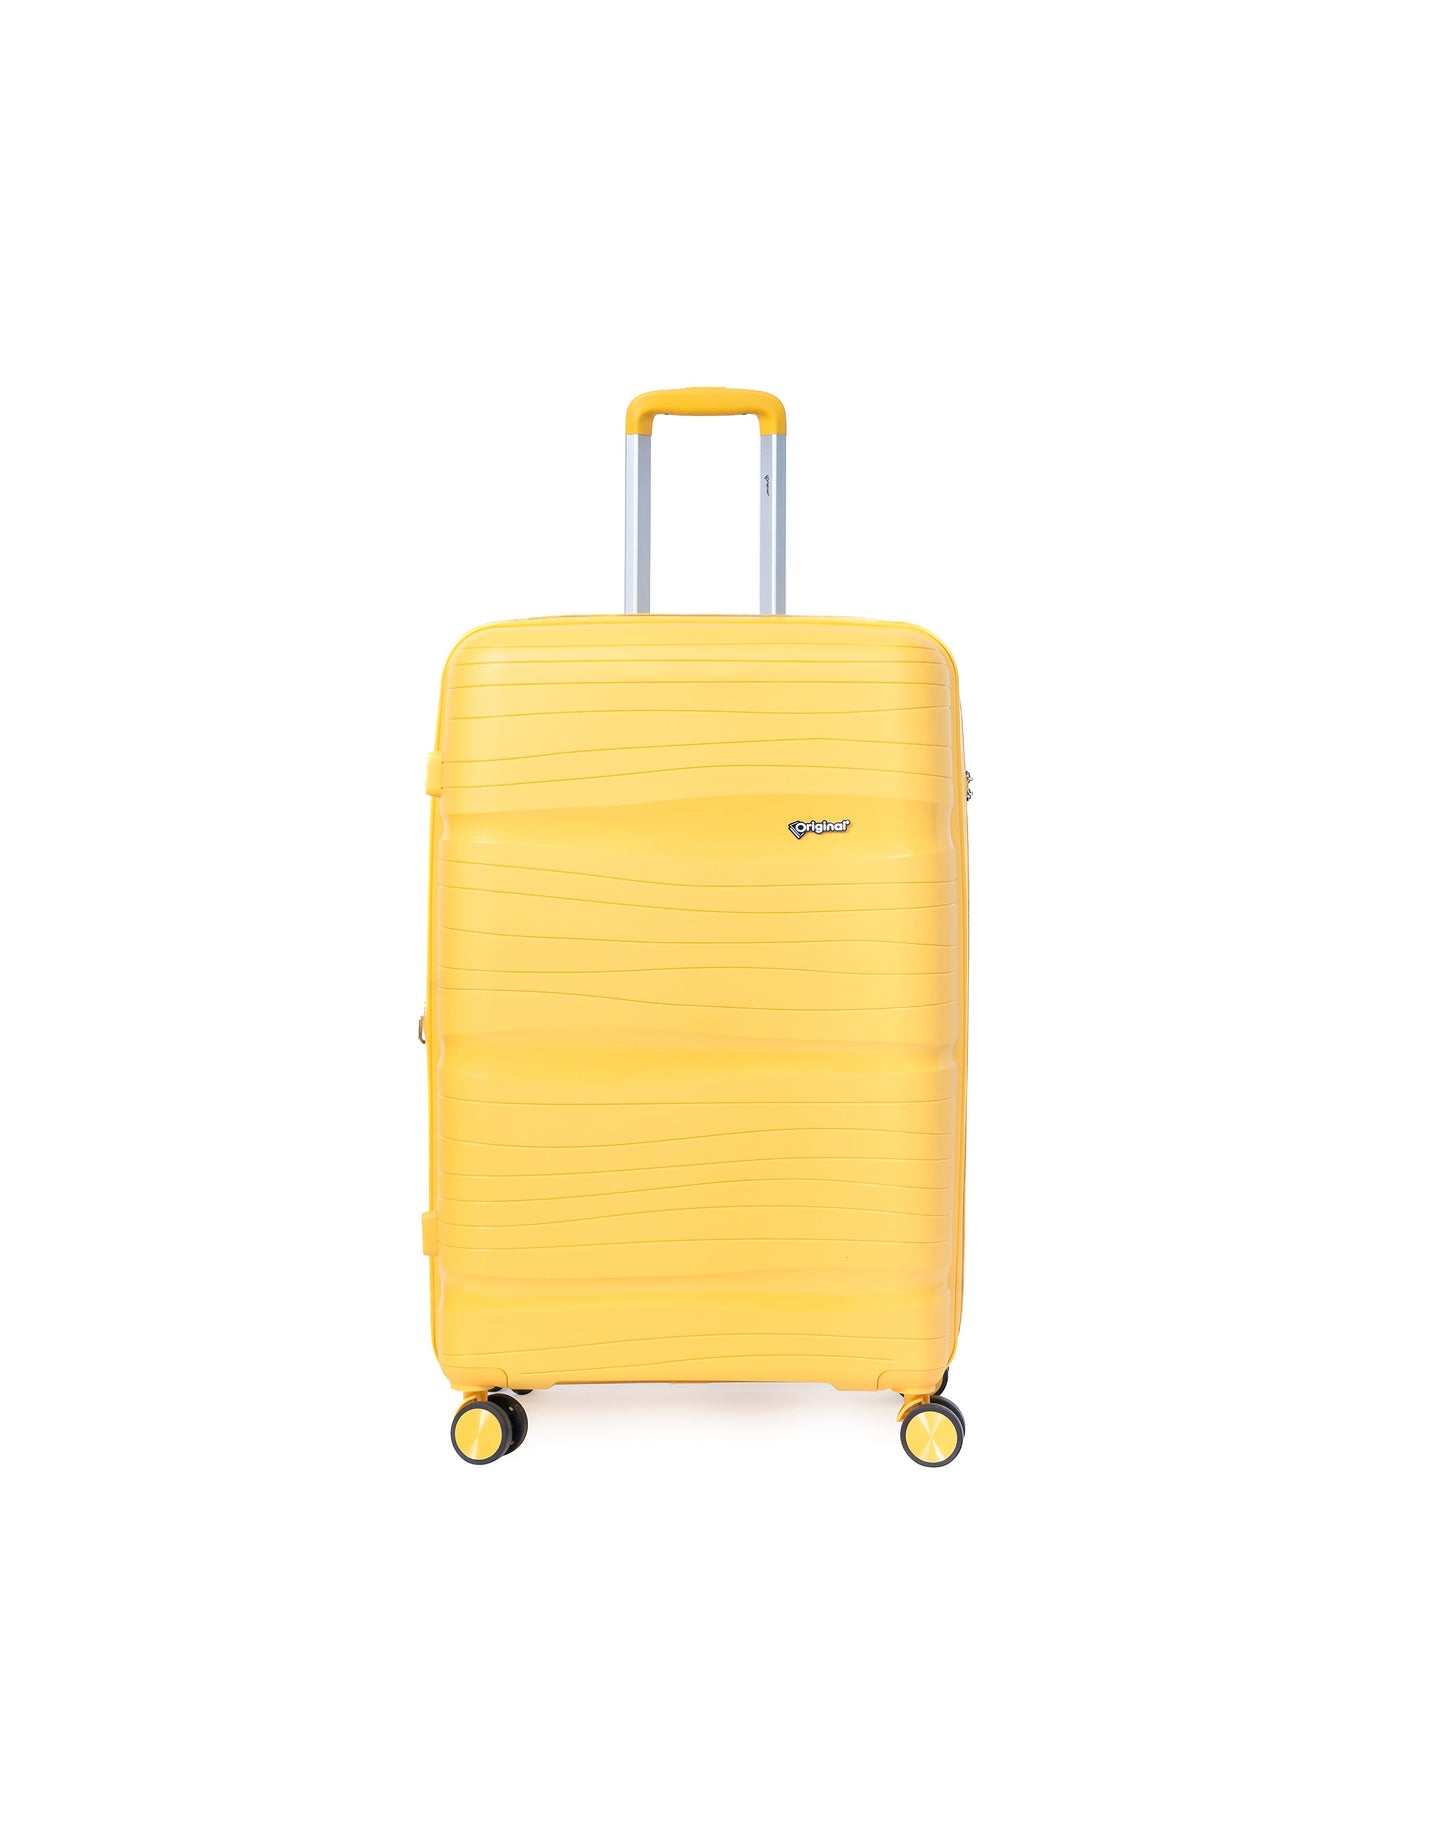 Original®-Mambo Trolley Bag Double Zipper Available in Single Pc Carry On Luggage/Checked In Luggage